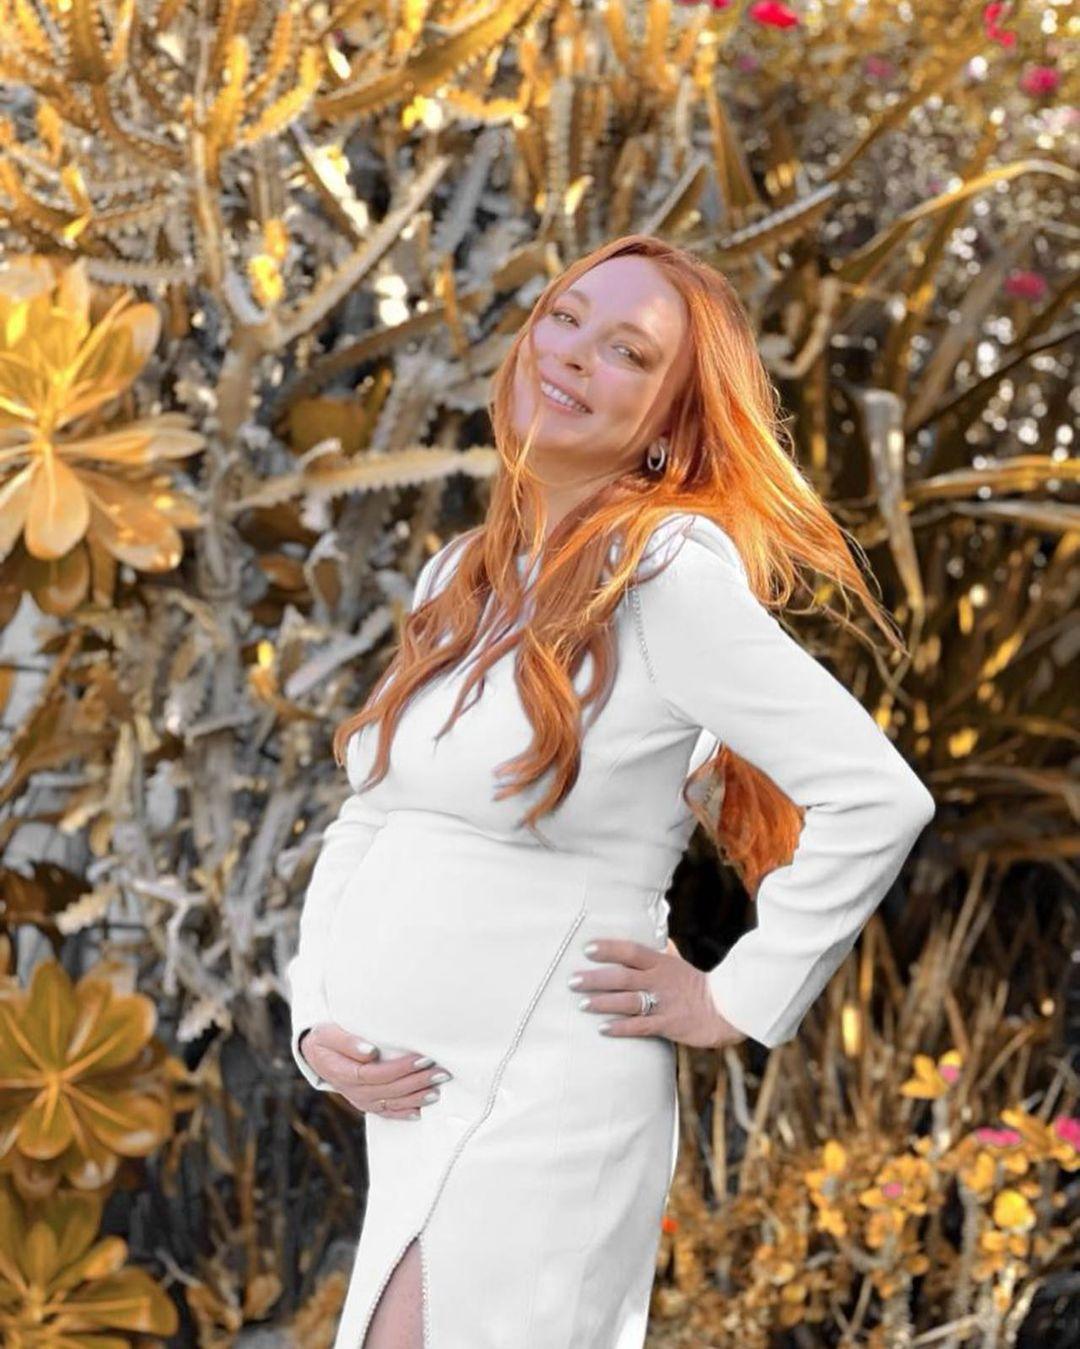 Last month, Lindsay Lohan shared photos from her pregnancy, including a number of shots from her baby shower earlier this month.